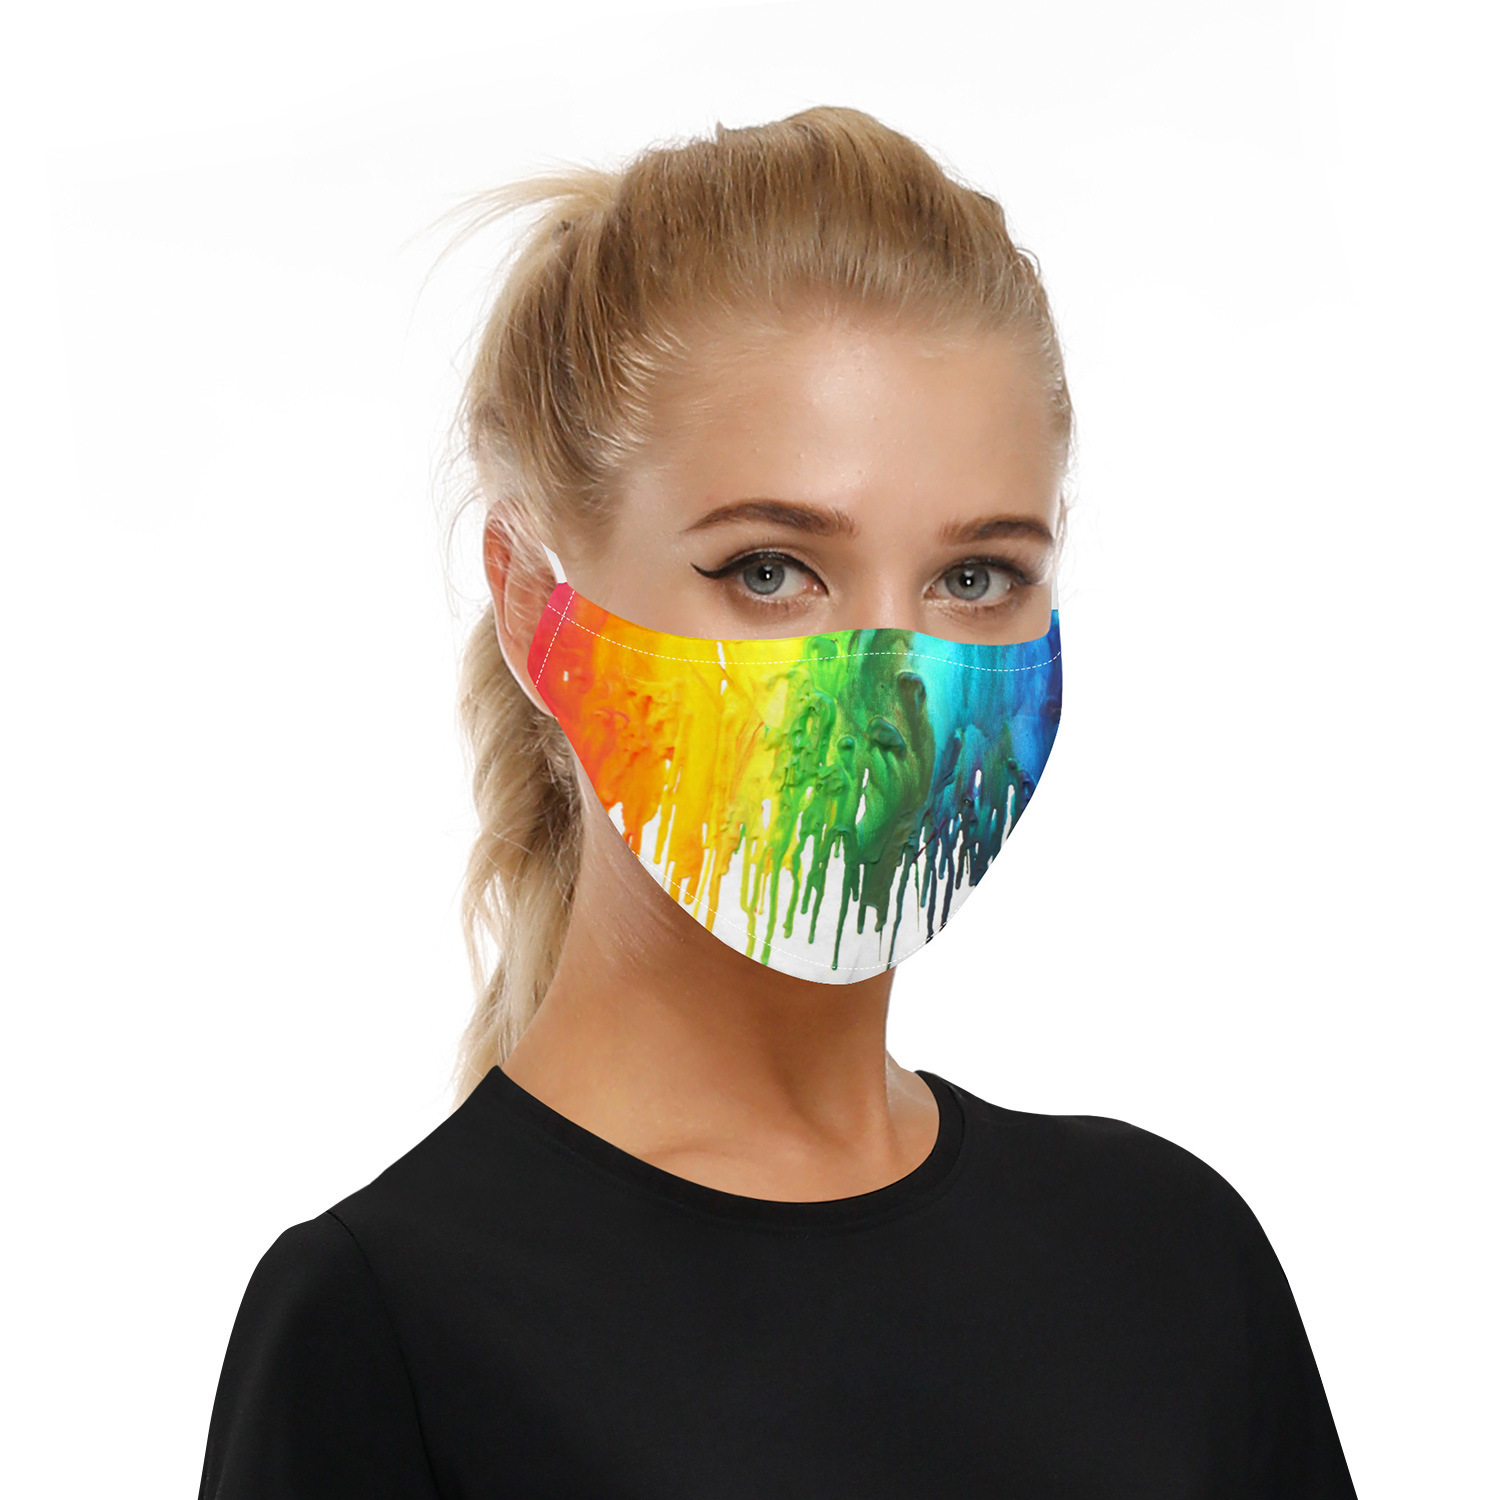 InkDigital-series-Double-Chip-Anti-PM25-Dust-proof-Face-Mask-Breathable-Protective-Mask-Windproof-Fo-1664842-10